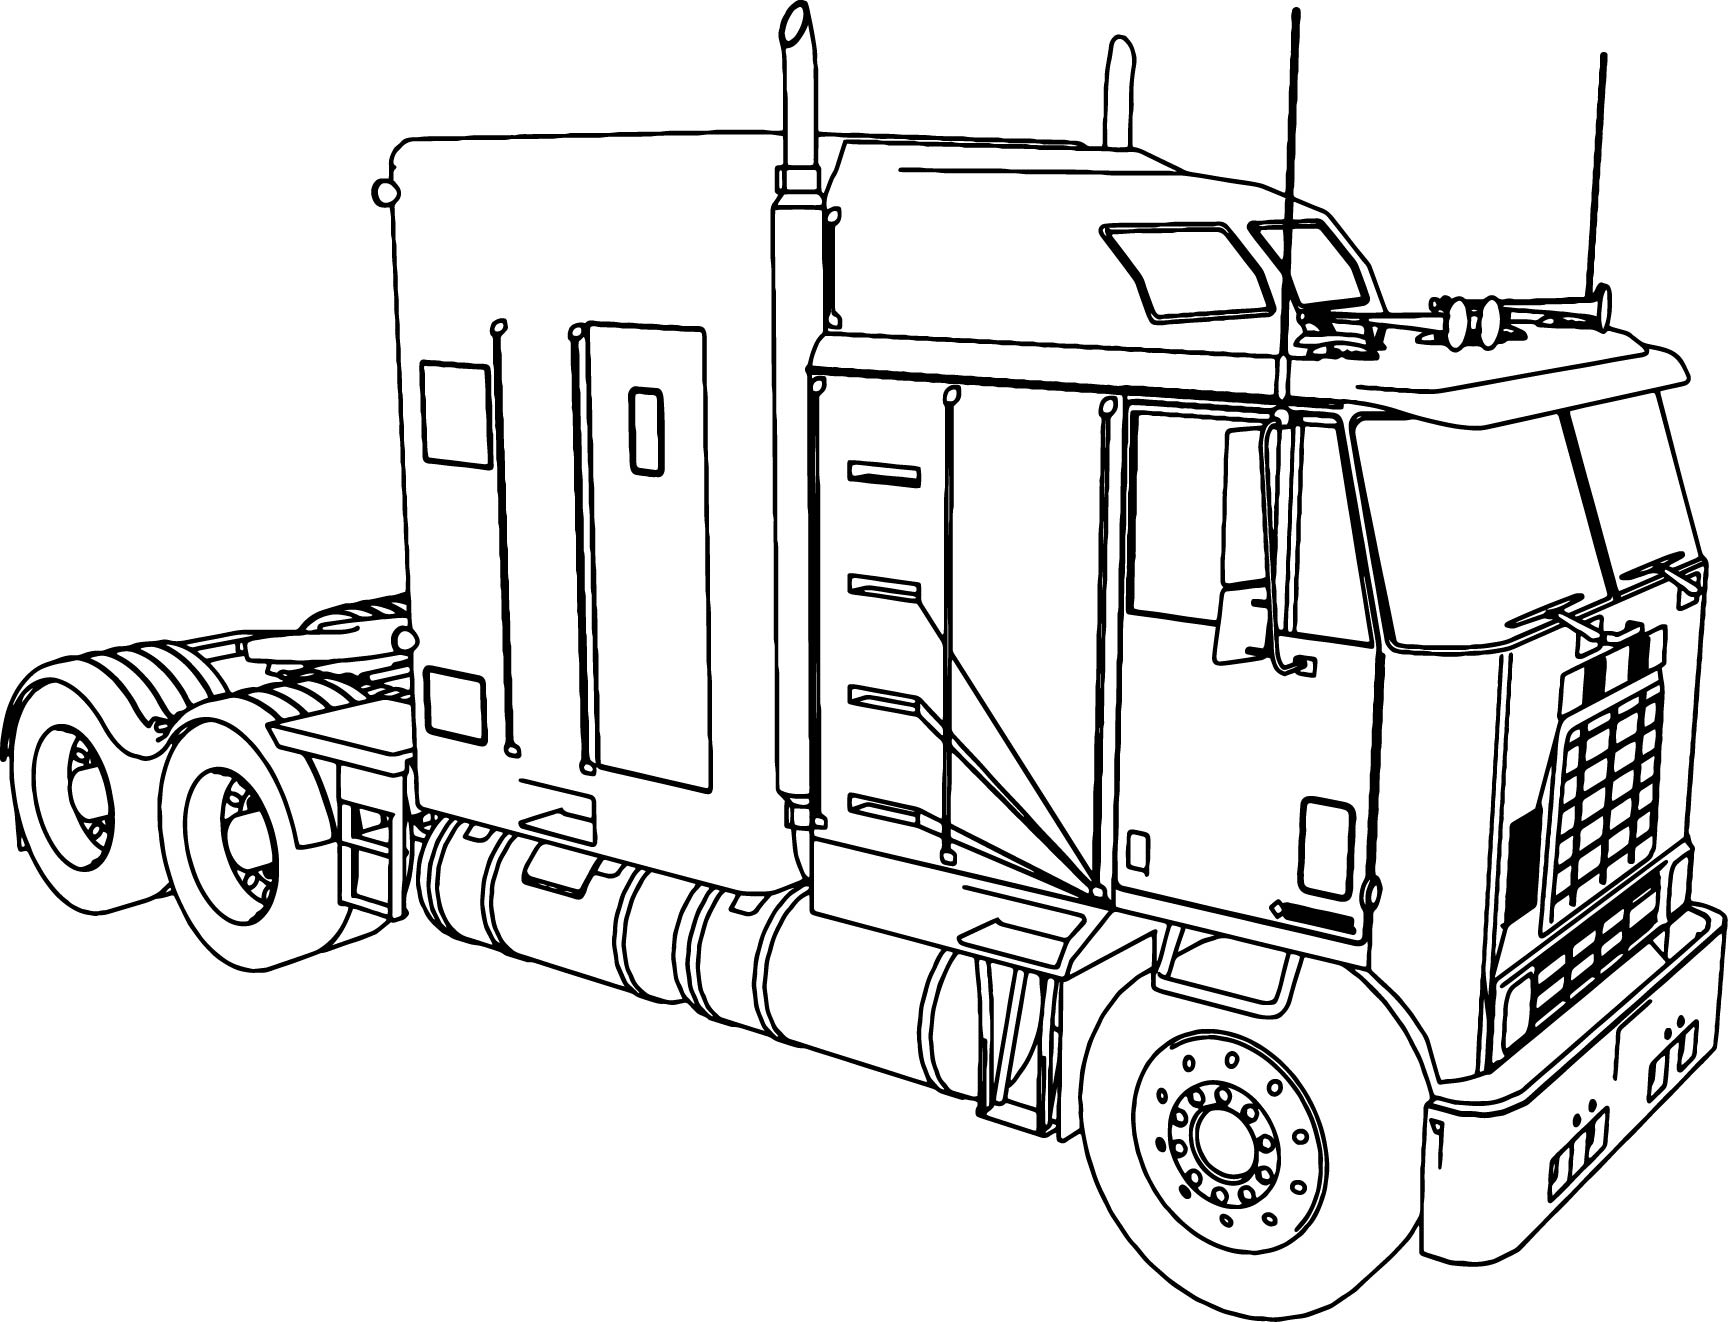 Big Truck Coloring Pages 18 Coloring Pages Of Trucks And Trailers Big Rig Truck Coloring